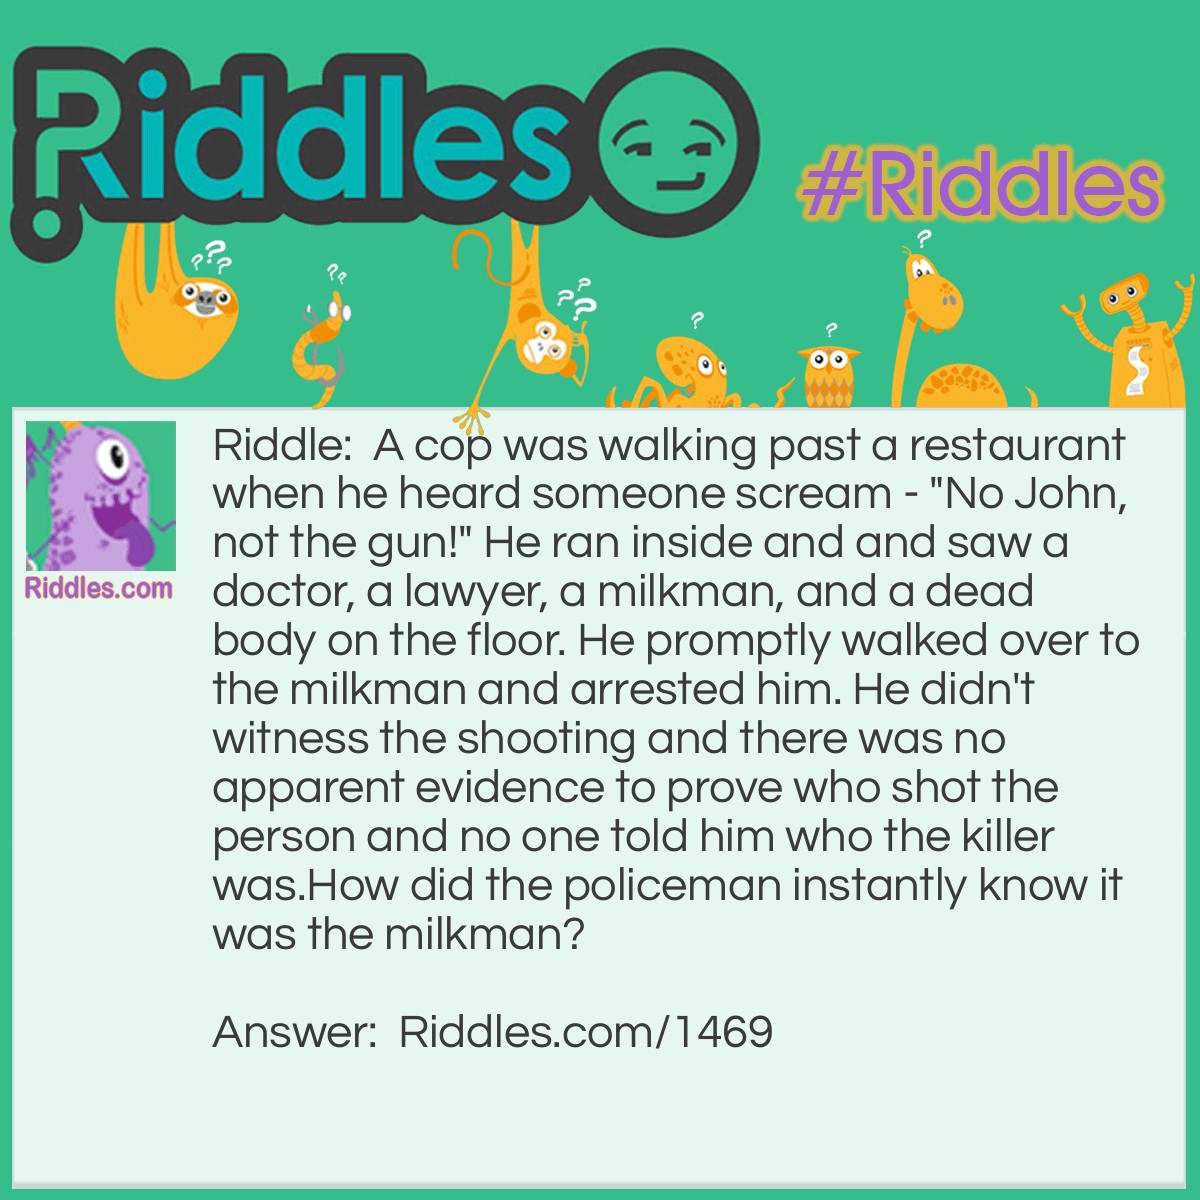 Riddle: A cop was walking past a restaurant when he heard someone scream - "No John, not the gun!" He ran inside and and saw a doctor, a lawyer, a milkman, and a dead body on the floor. He promptly walked over to the milkman and arrested him. He didn't witness the shooting and there was no apparent evidence to prove who shot the person and no one told him who the killer was.
How did the policeman instantly know it was the milkman? Answer: The milkman was the only male. The doctor and lawyer were females, so the cop knew that "John" was the milkman.